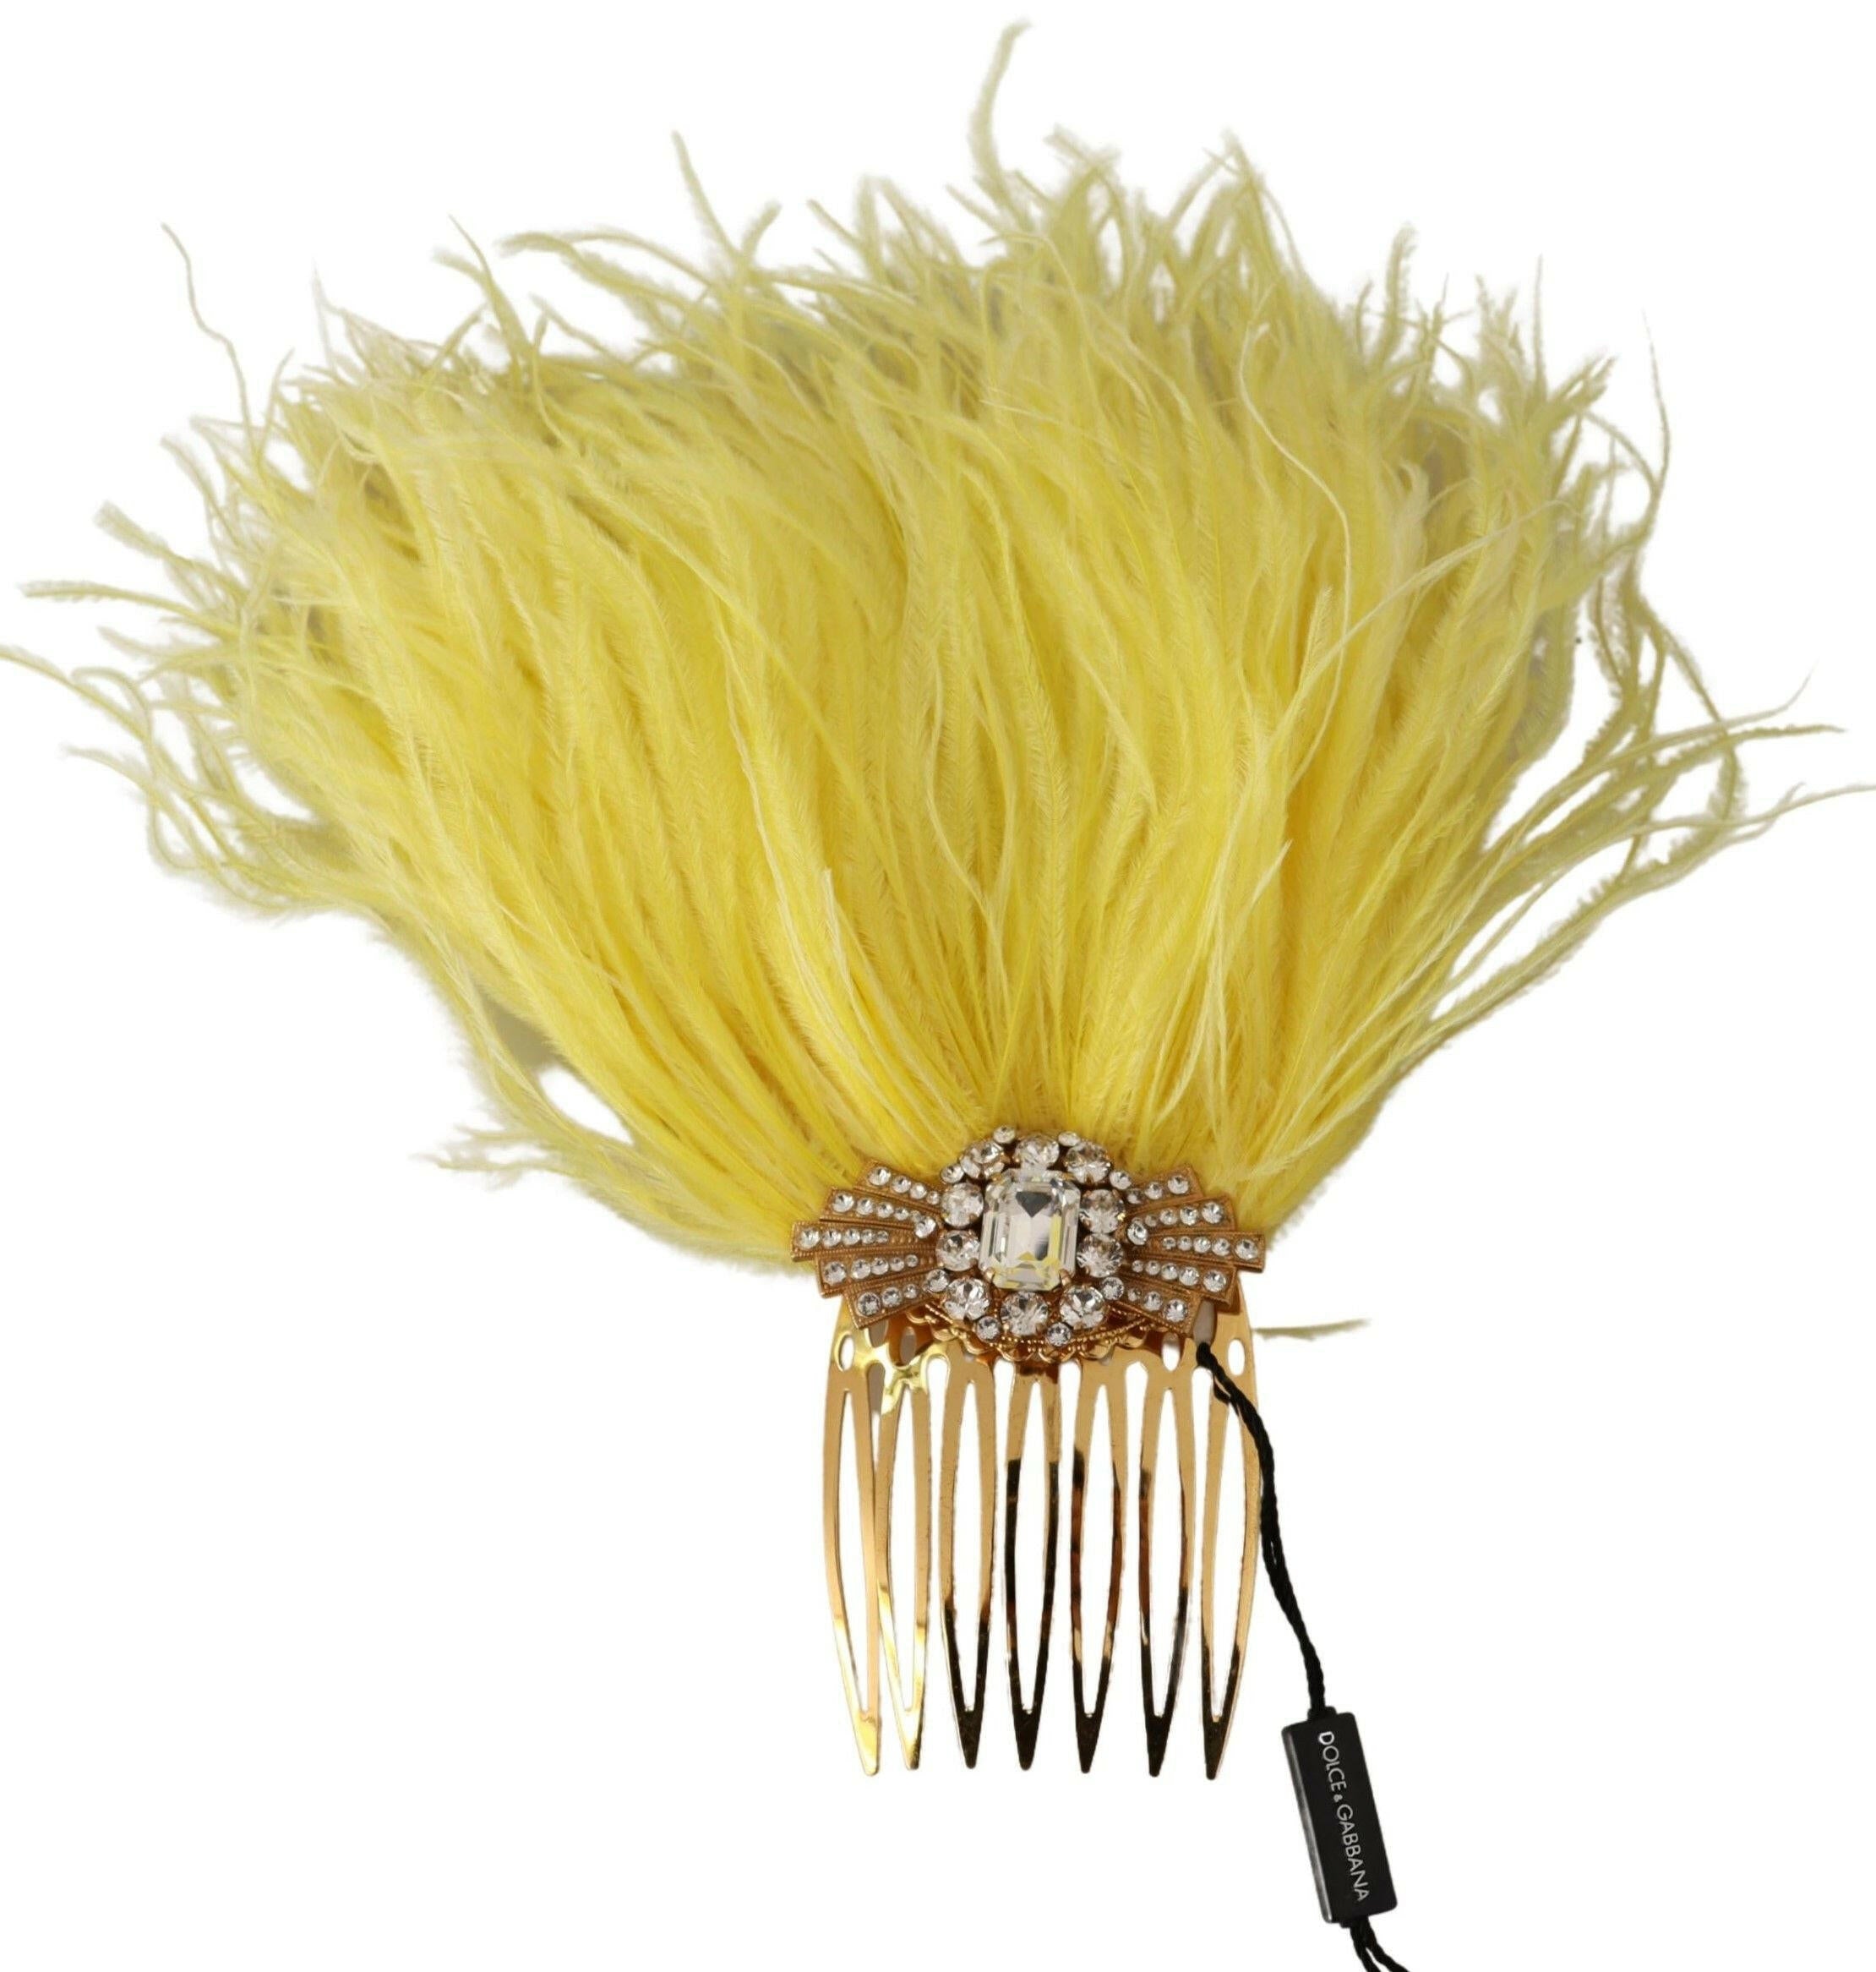 Dolce & Gabbana Gold Brass Clear Crystal Feather Comb Hair Grip Stick - GENUINE AUTHENTIC BRAND LLC  